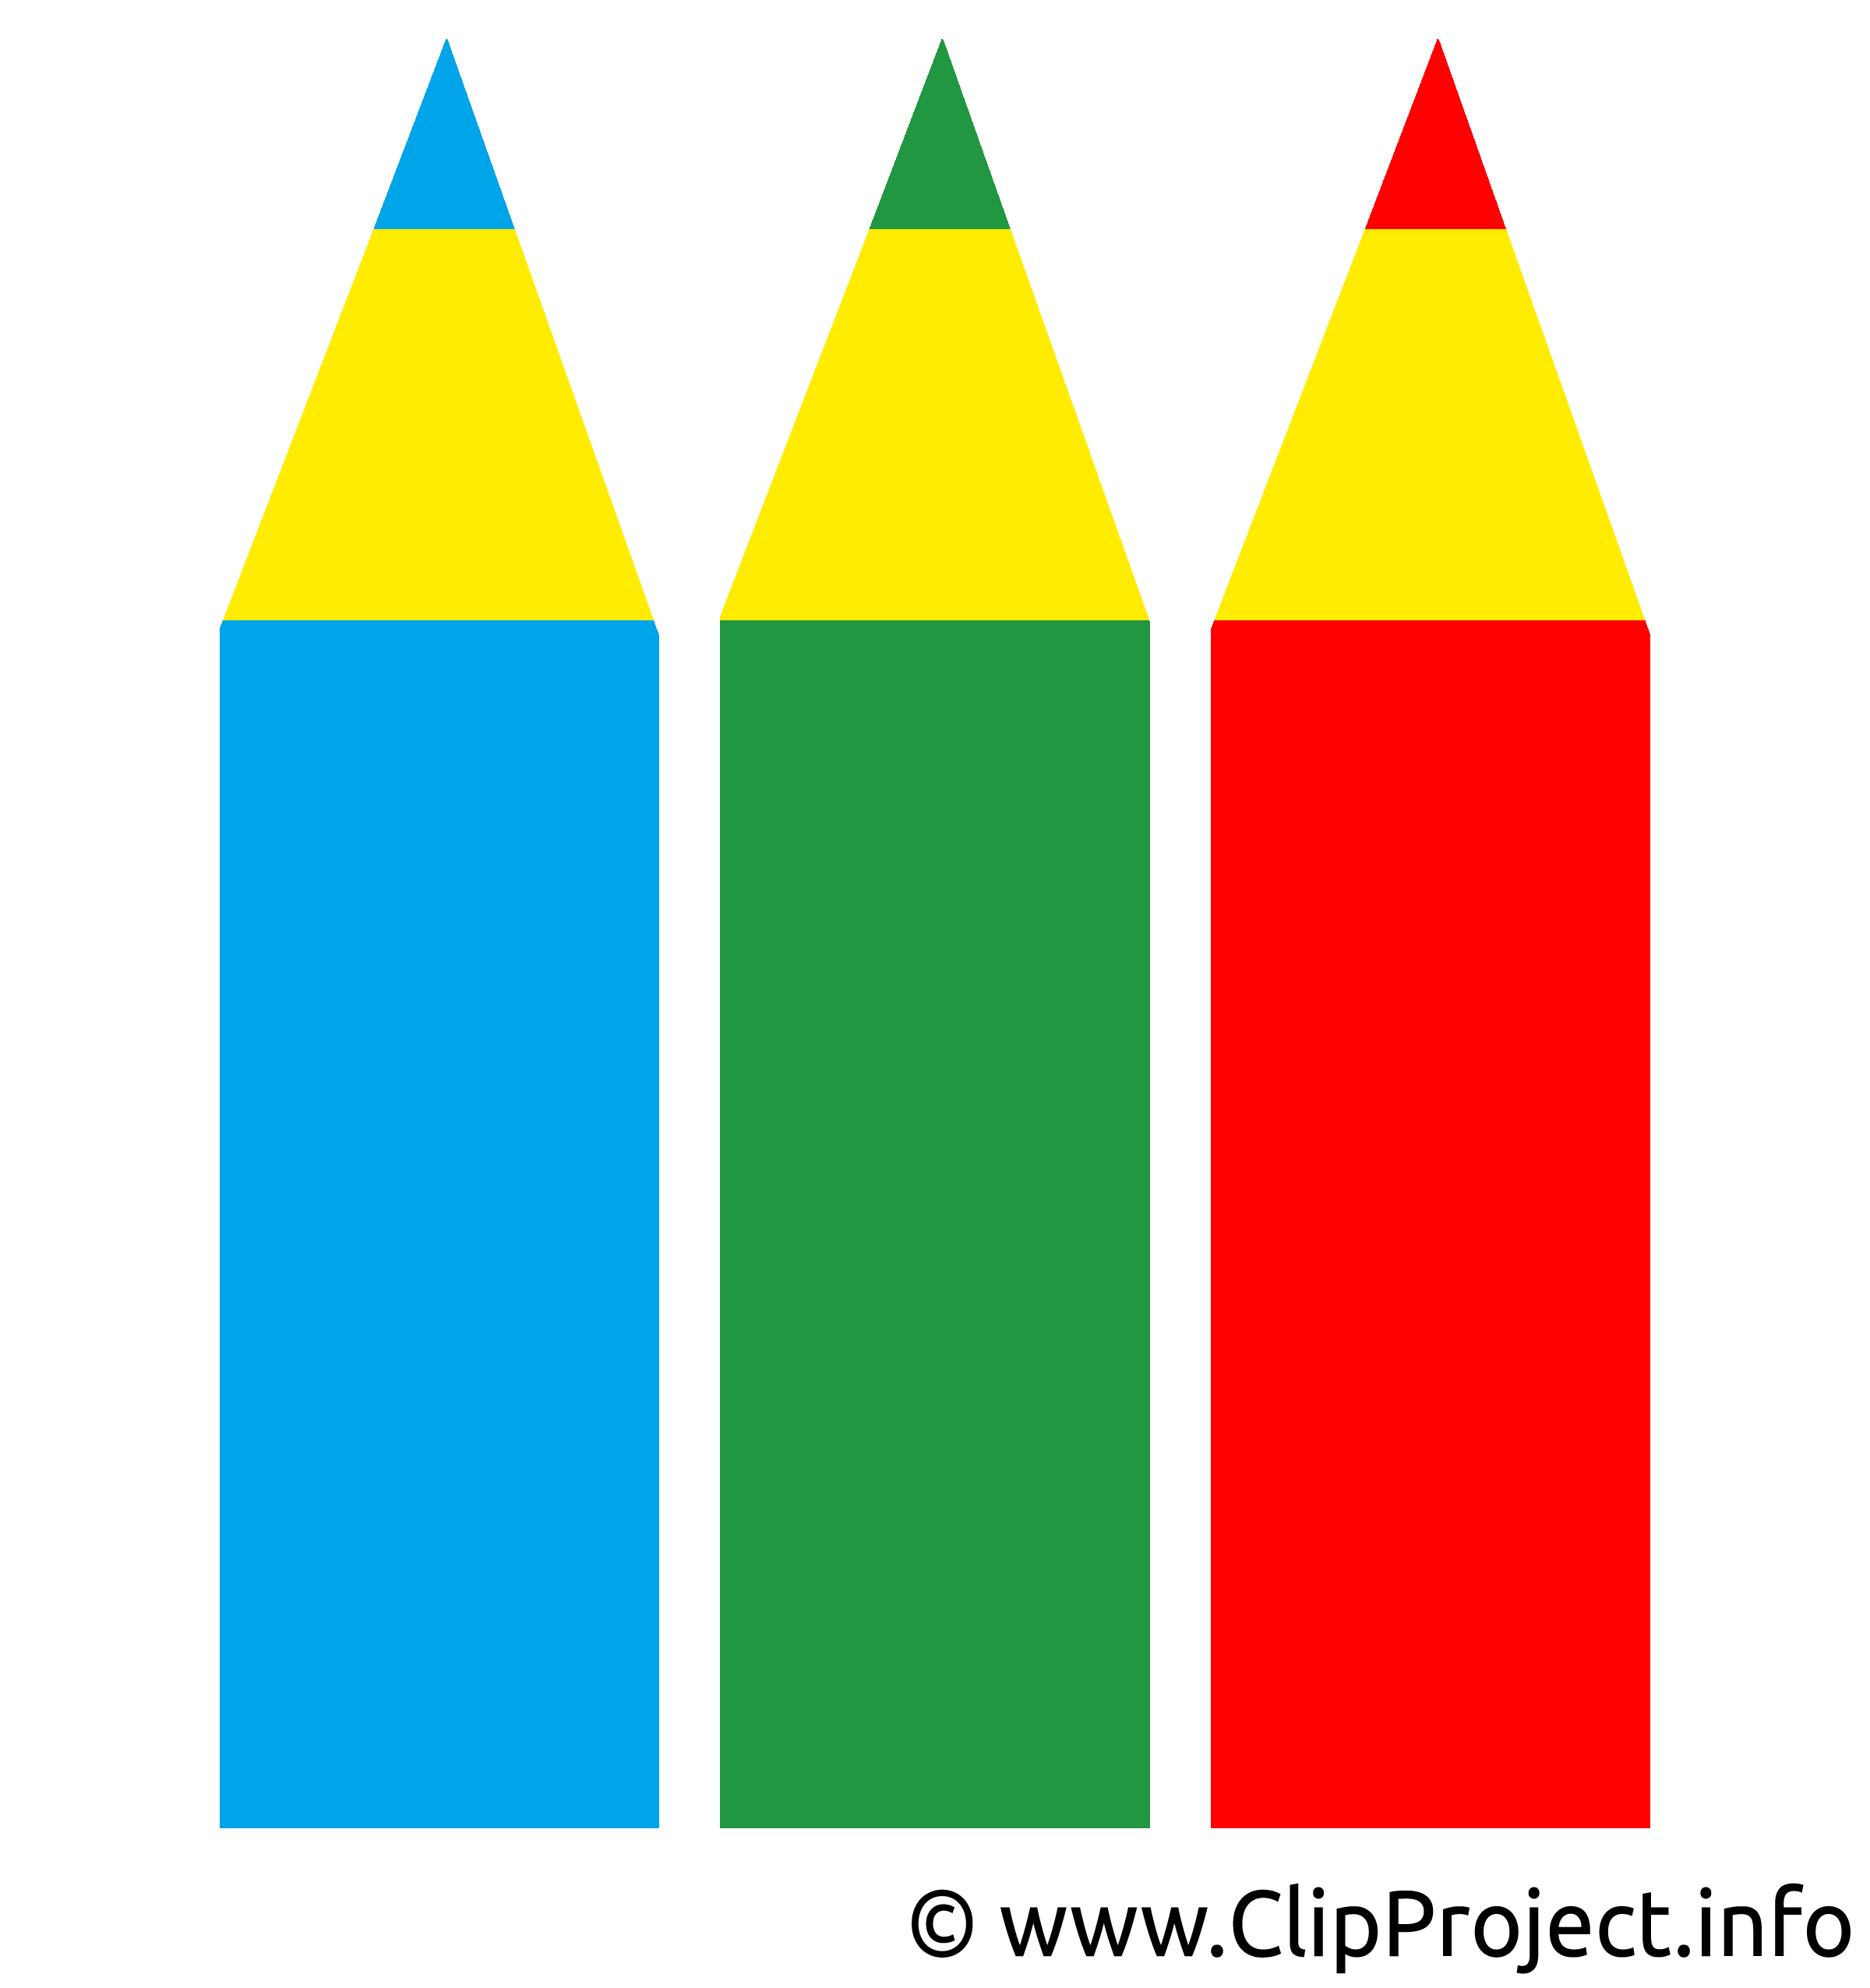 Image crayons – Entreprise images cliparts